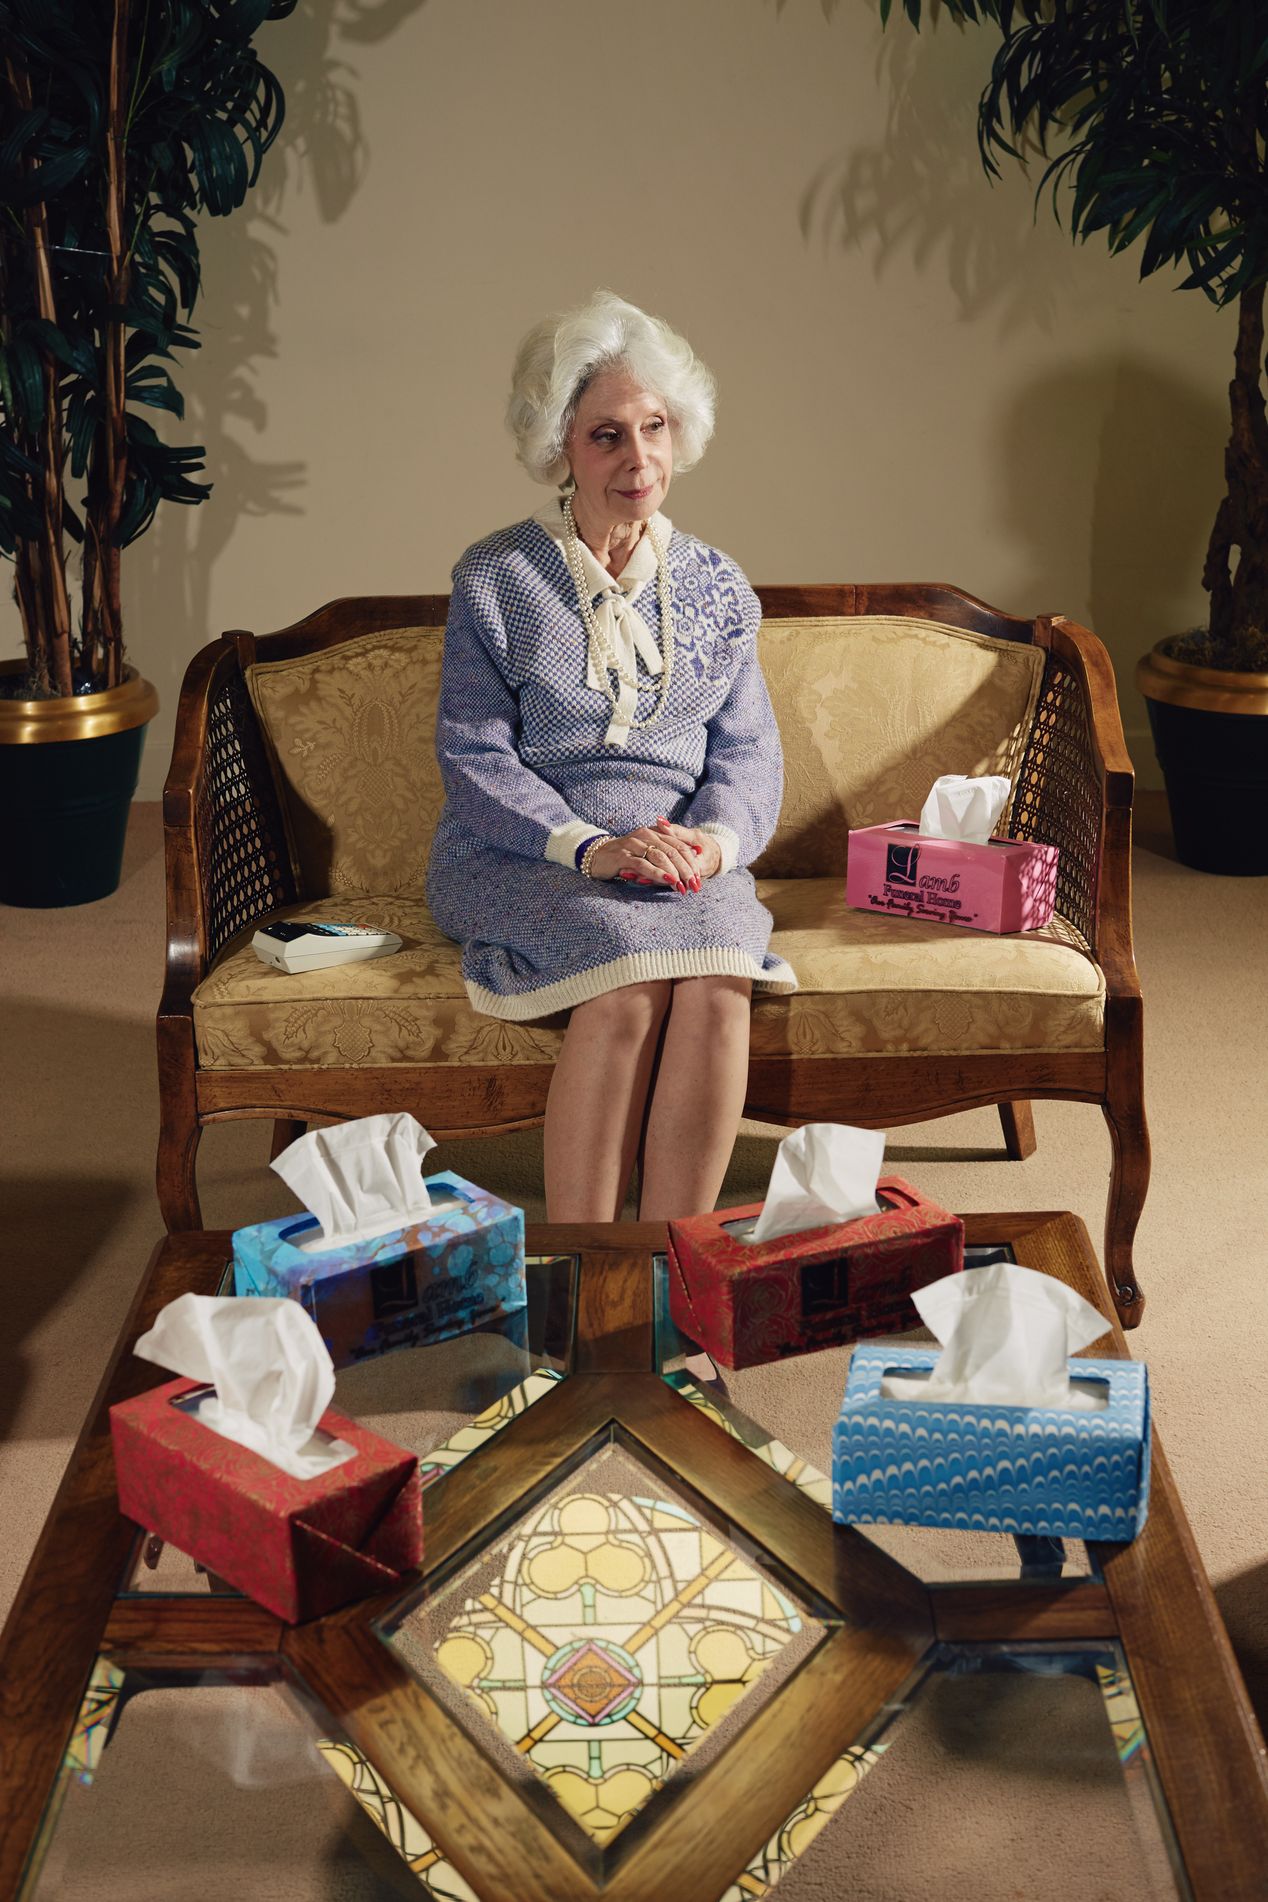 An older female sitting on a couch, surrounded by tissues and tissue boxes, Ilona Szwarc, Los Angeles editorial photographer.